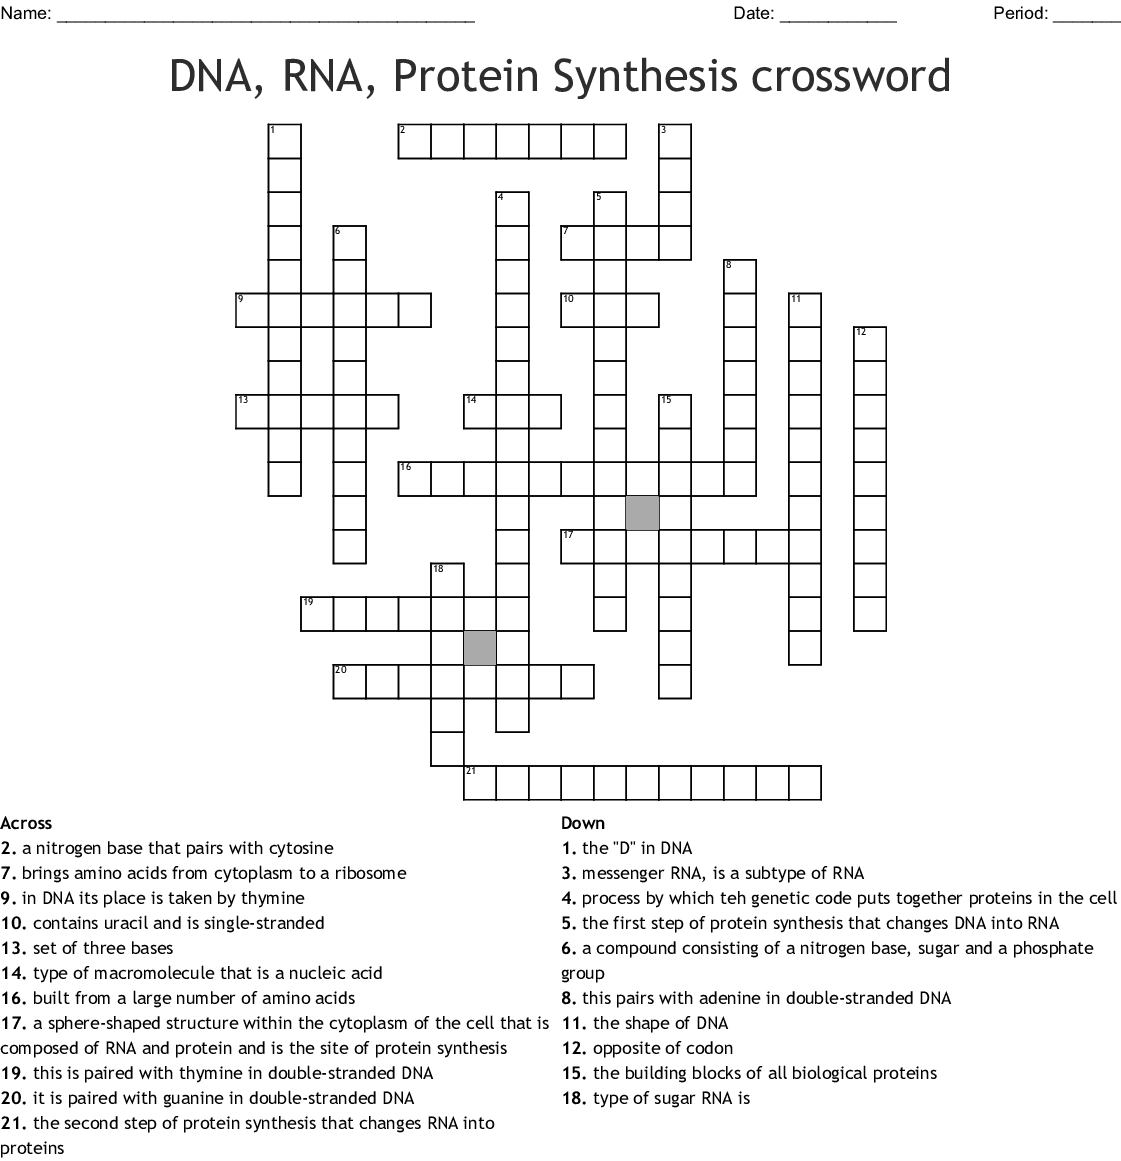 worksheet-on-dna-rna-and-protein-synthesis-answer-sheet-db-excel